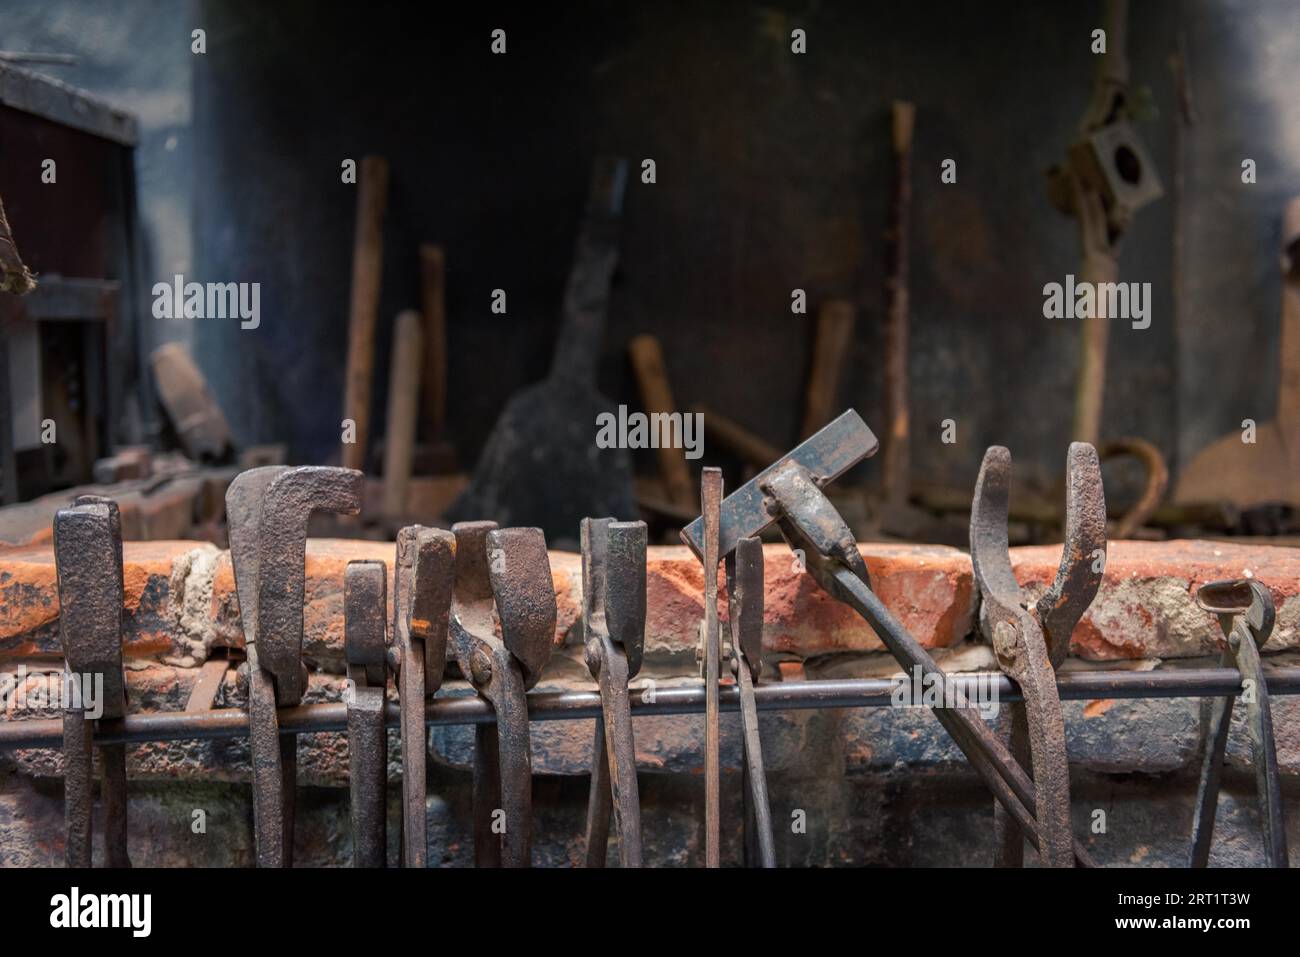 Blacksmith Tongs Tool Hanged In Forge Stock Photo - Download Image